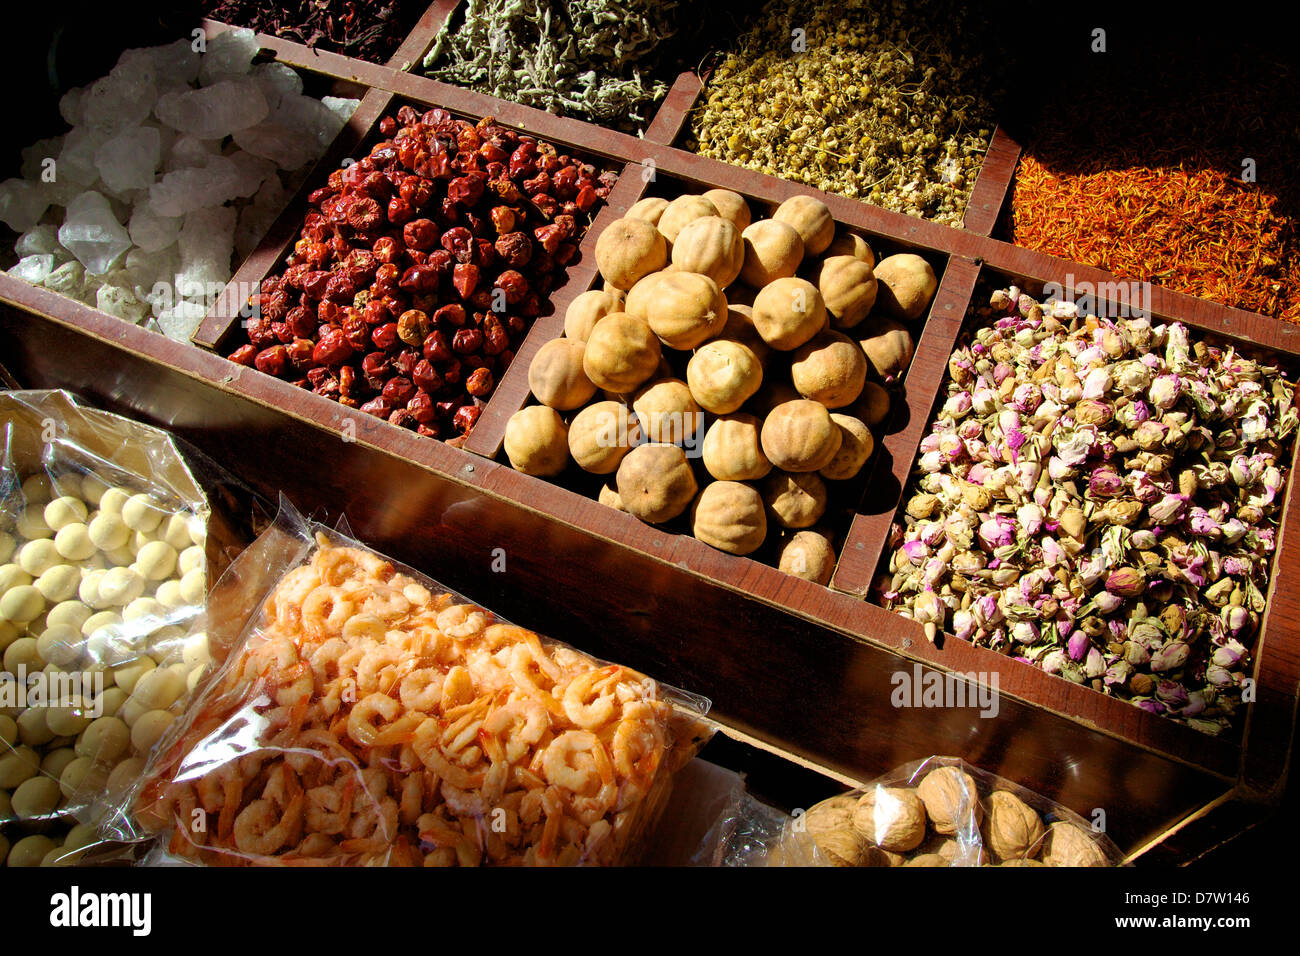 Street stall selling herbs and dried food, Dubai, United Arab Emirates, Middle East Stock Photo